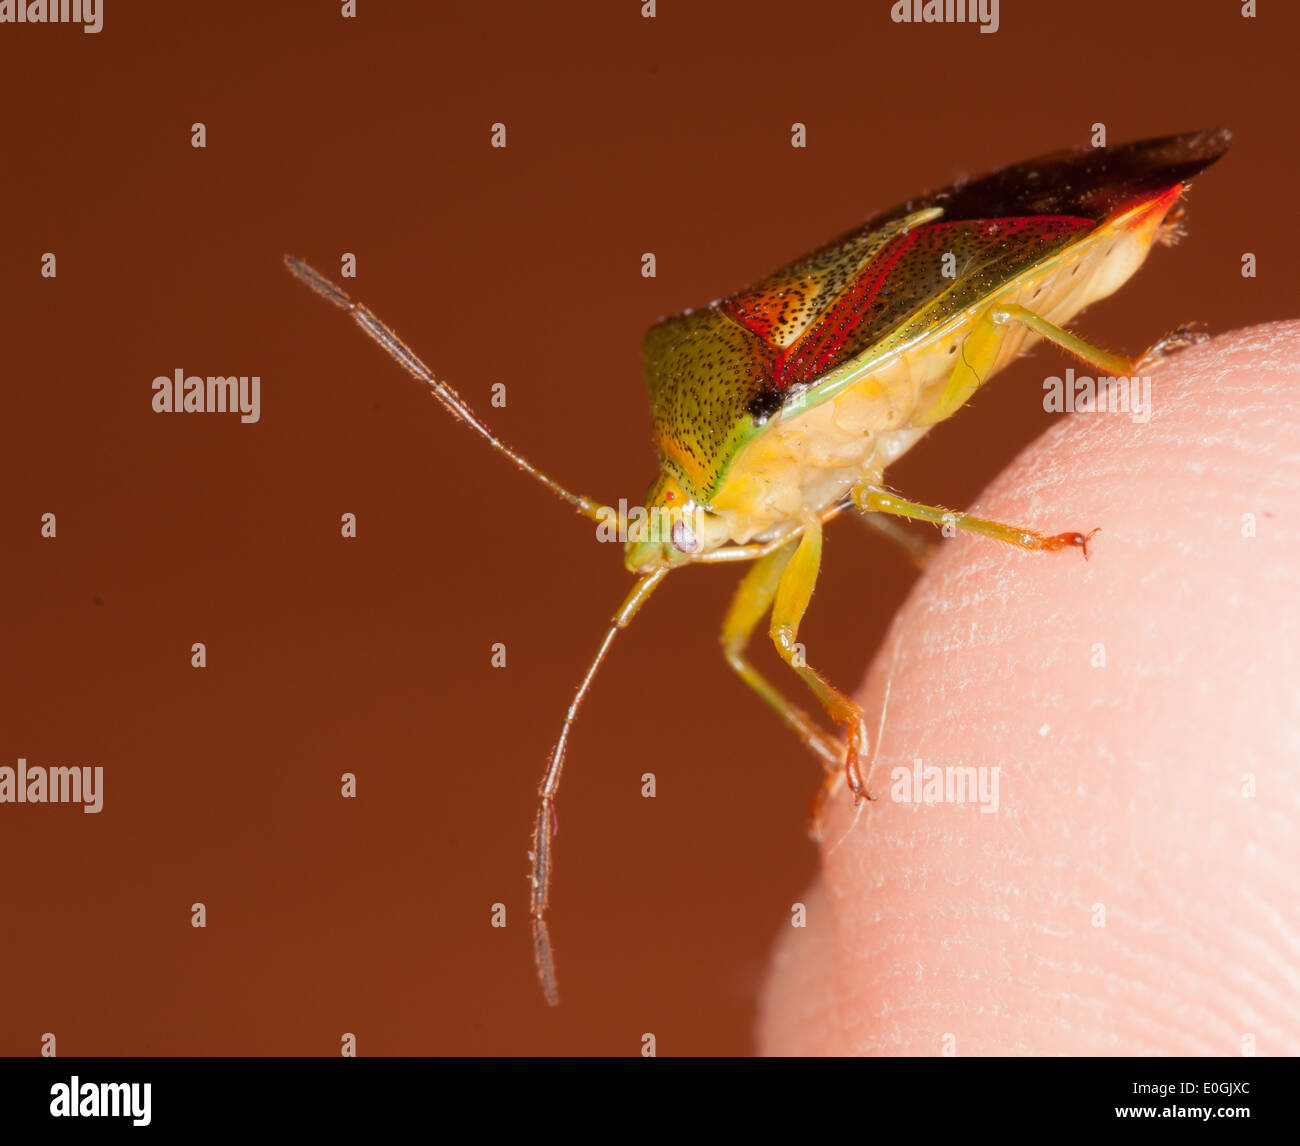 A bug on a finger with a brown background Stock Photo